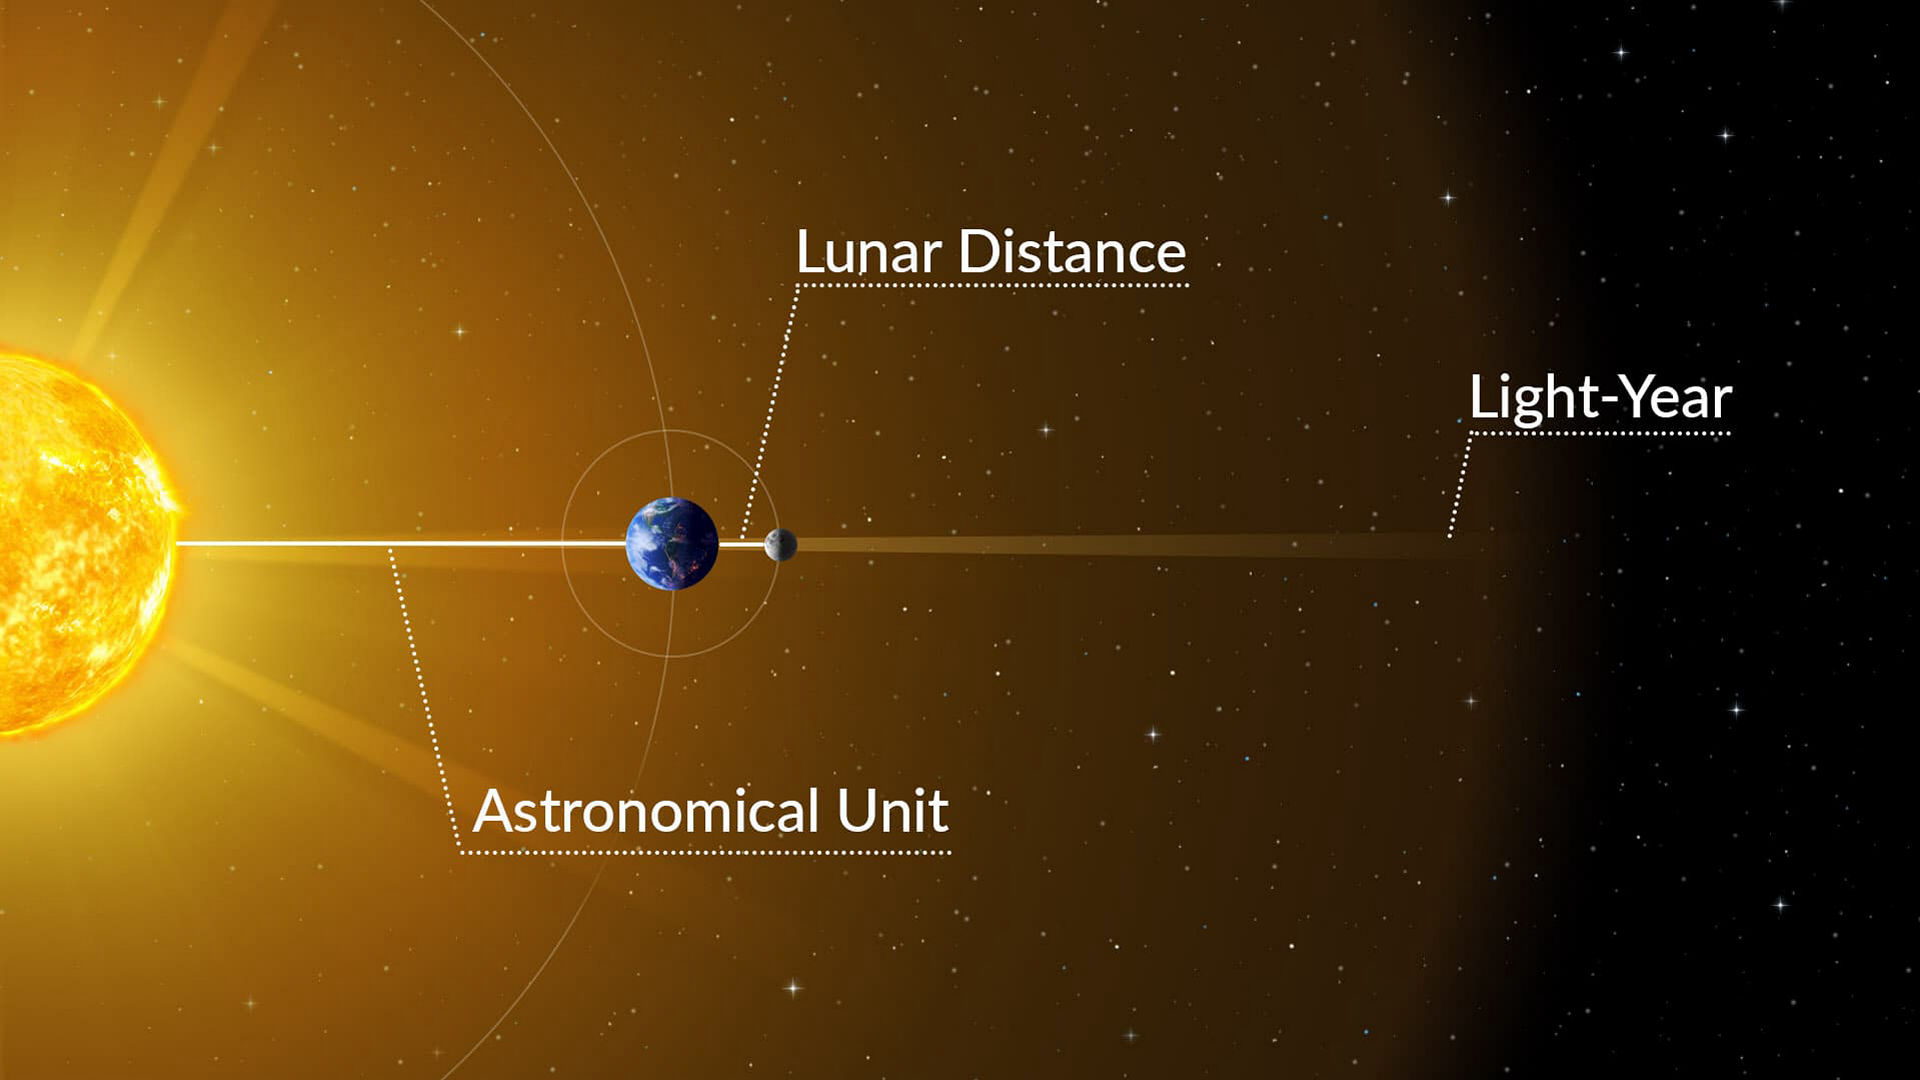 What’s bigger: LD, AU or Light-Year?